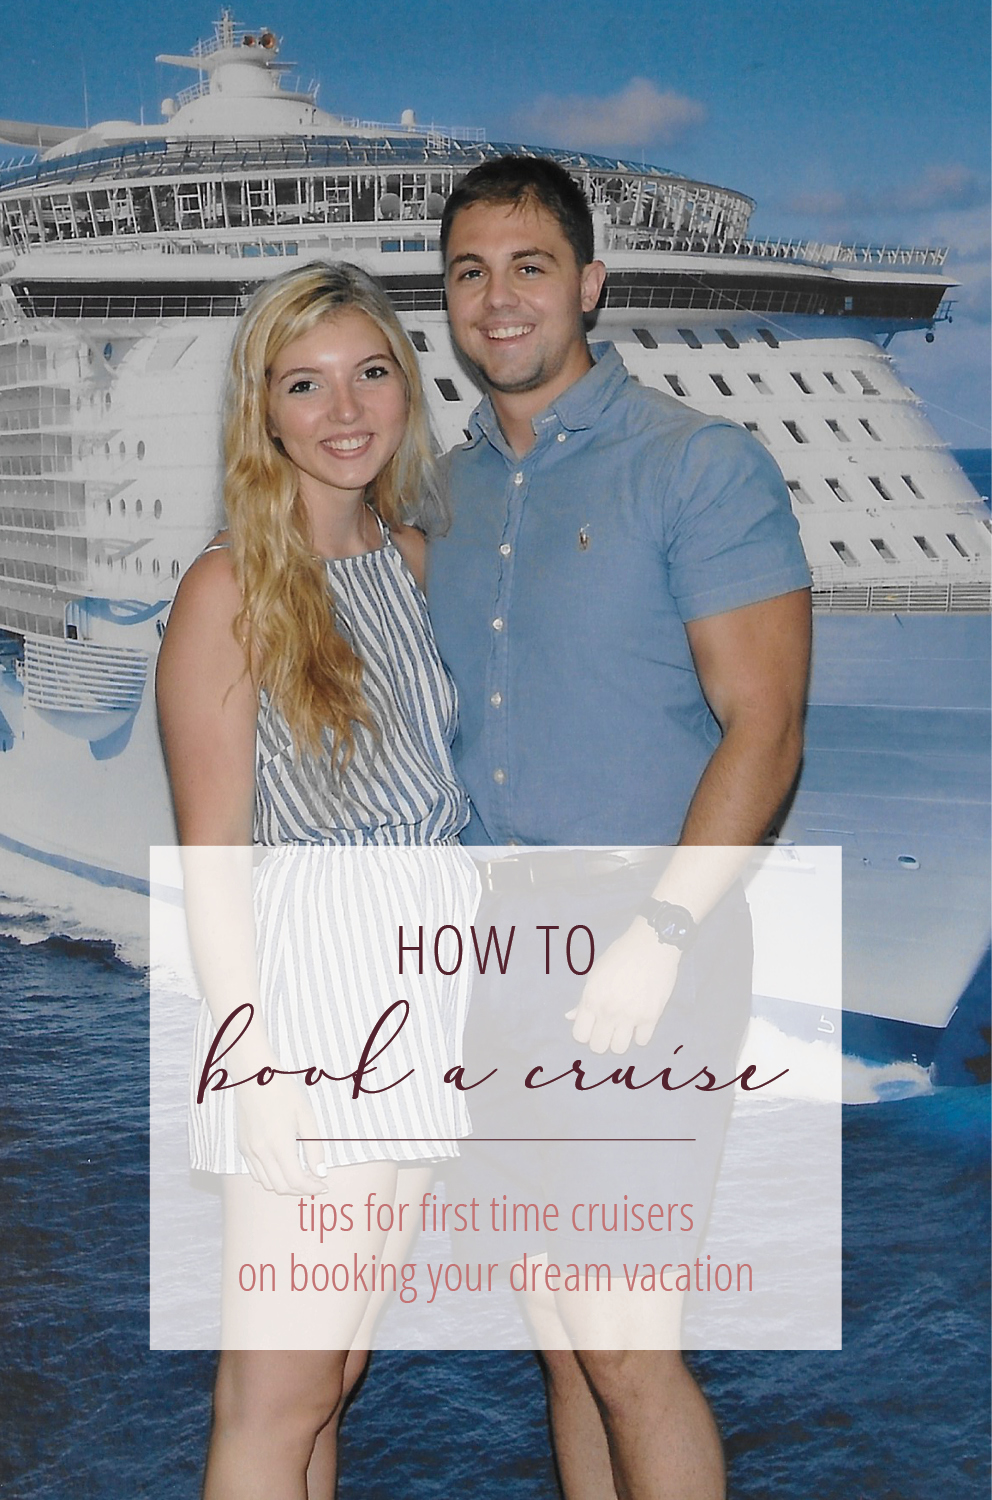 Everything you need to know on how to book a cruise! With so many options, I have broken down the process step-by-step to make planning your dream vacation a (ocean) breeze!